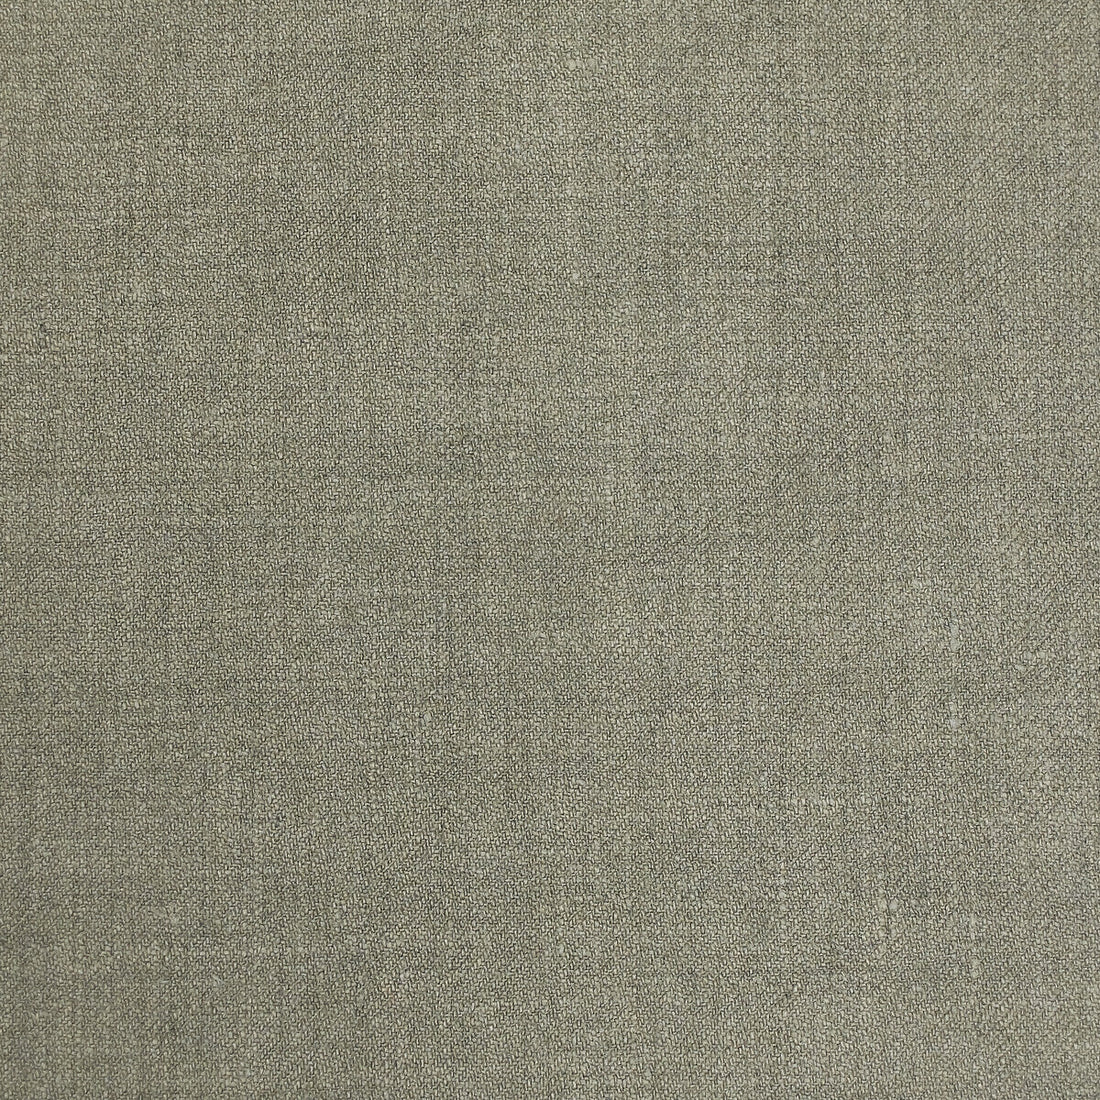 Albert fabric in 3 color - pattern LZ-30335.03.0 - by Kravet Design in the Lizzo collection